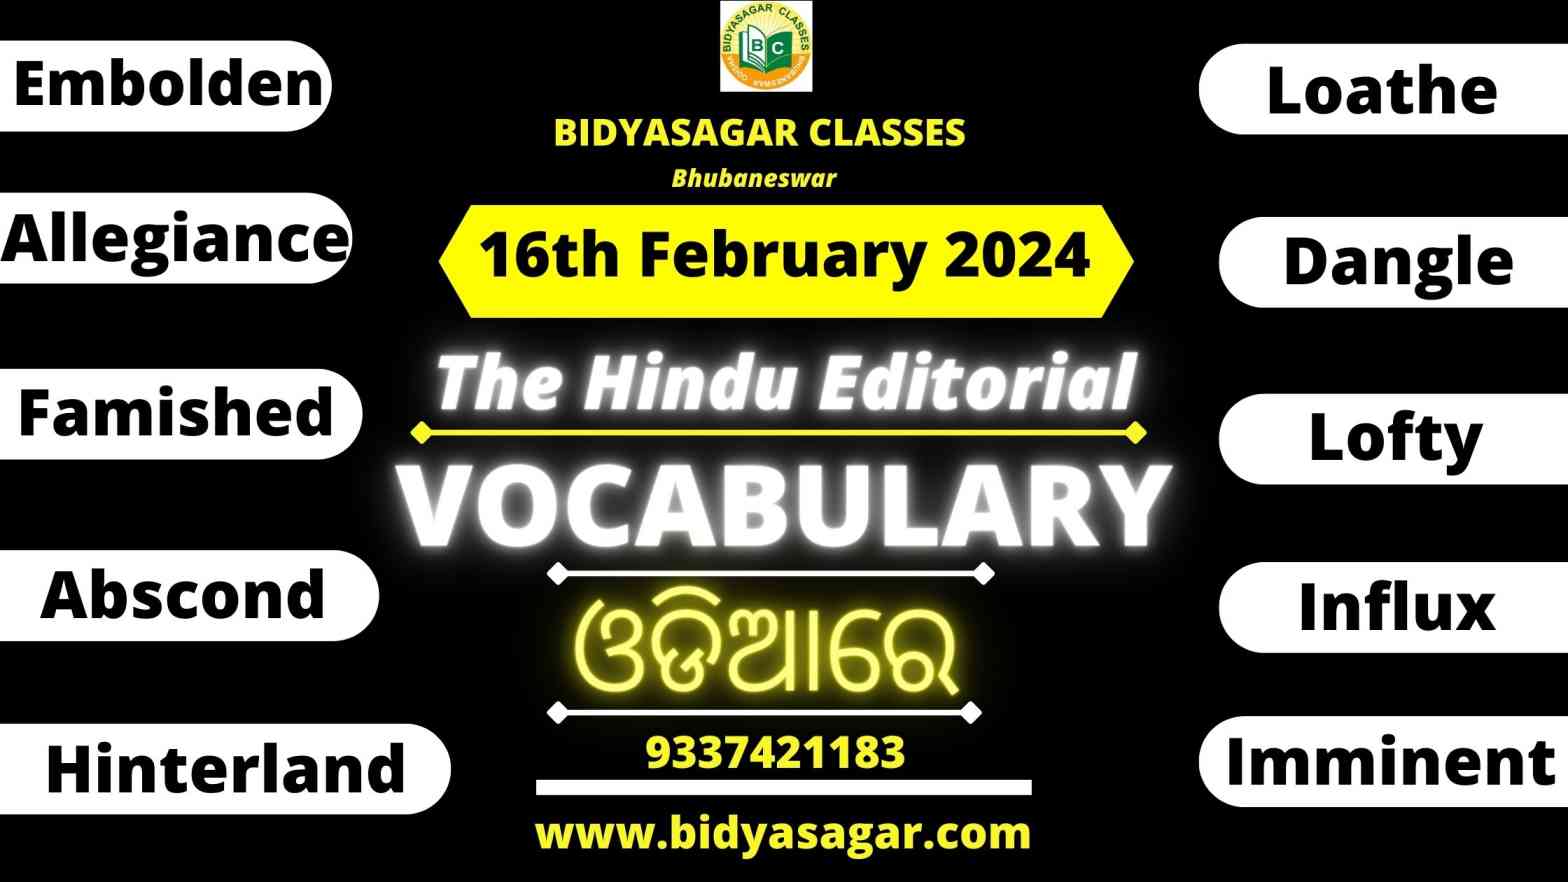 The Hindu Editorial Vocabulary of 16th February 2024